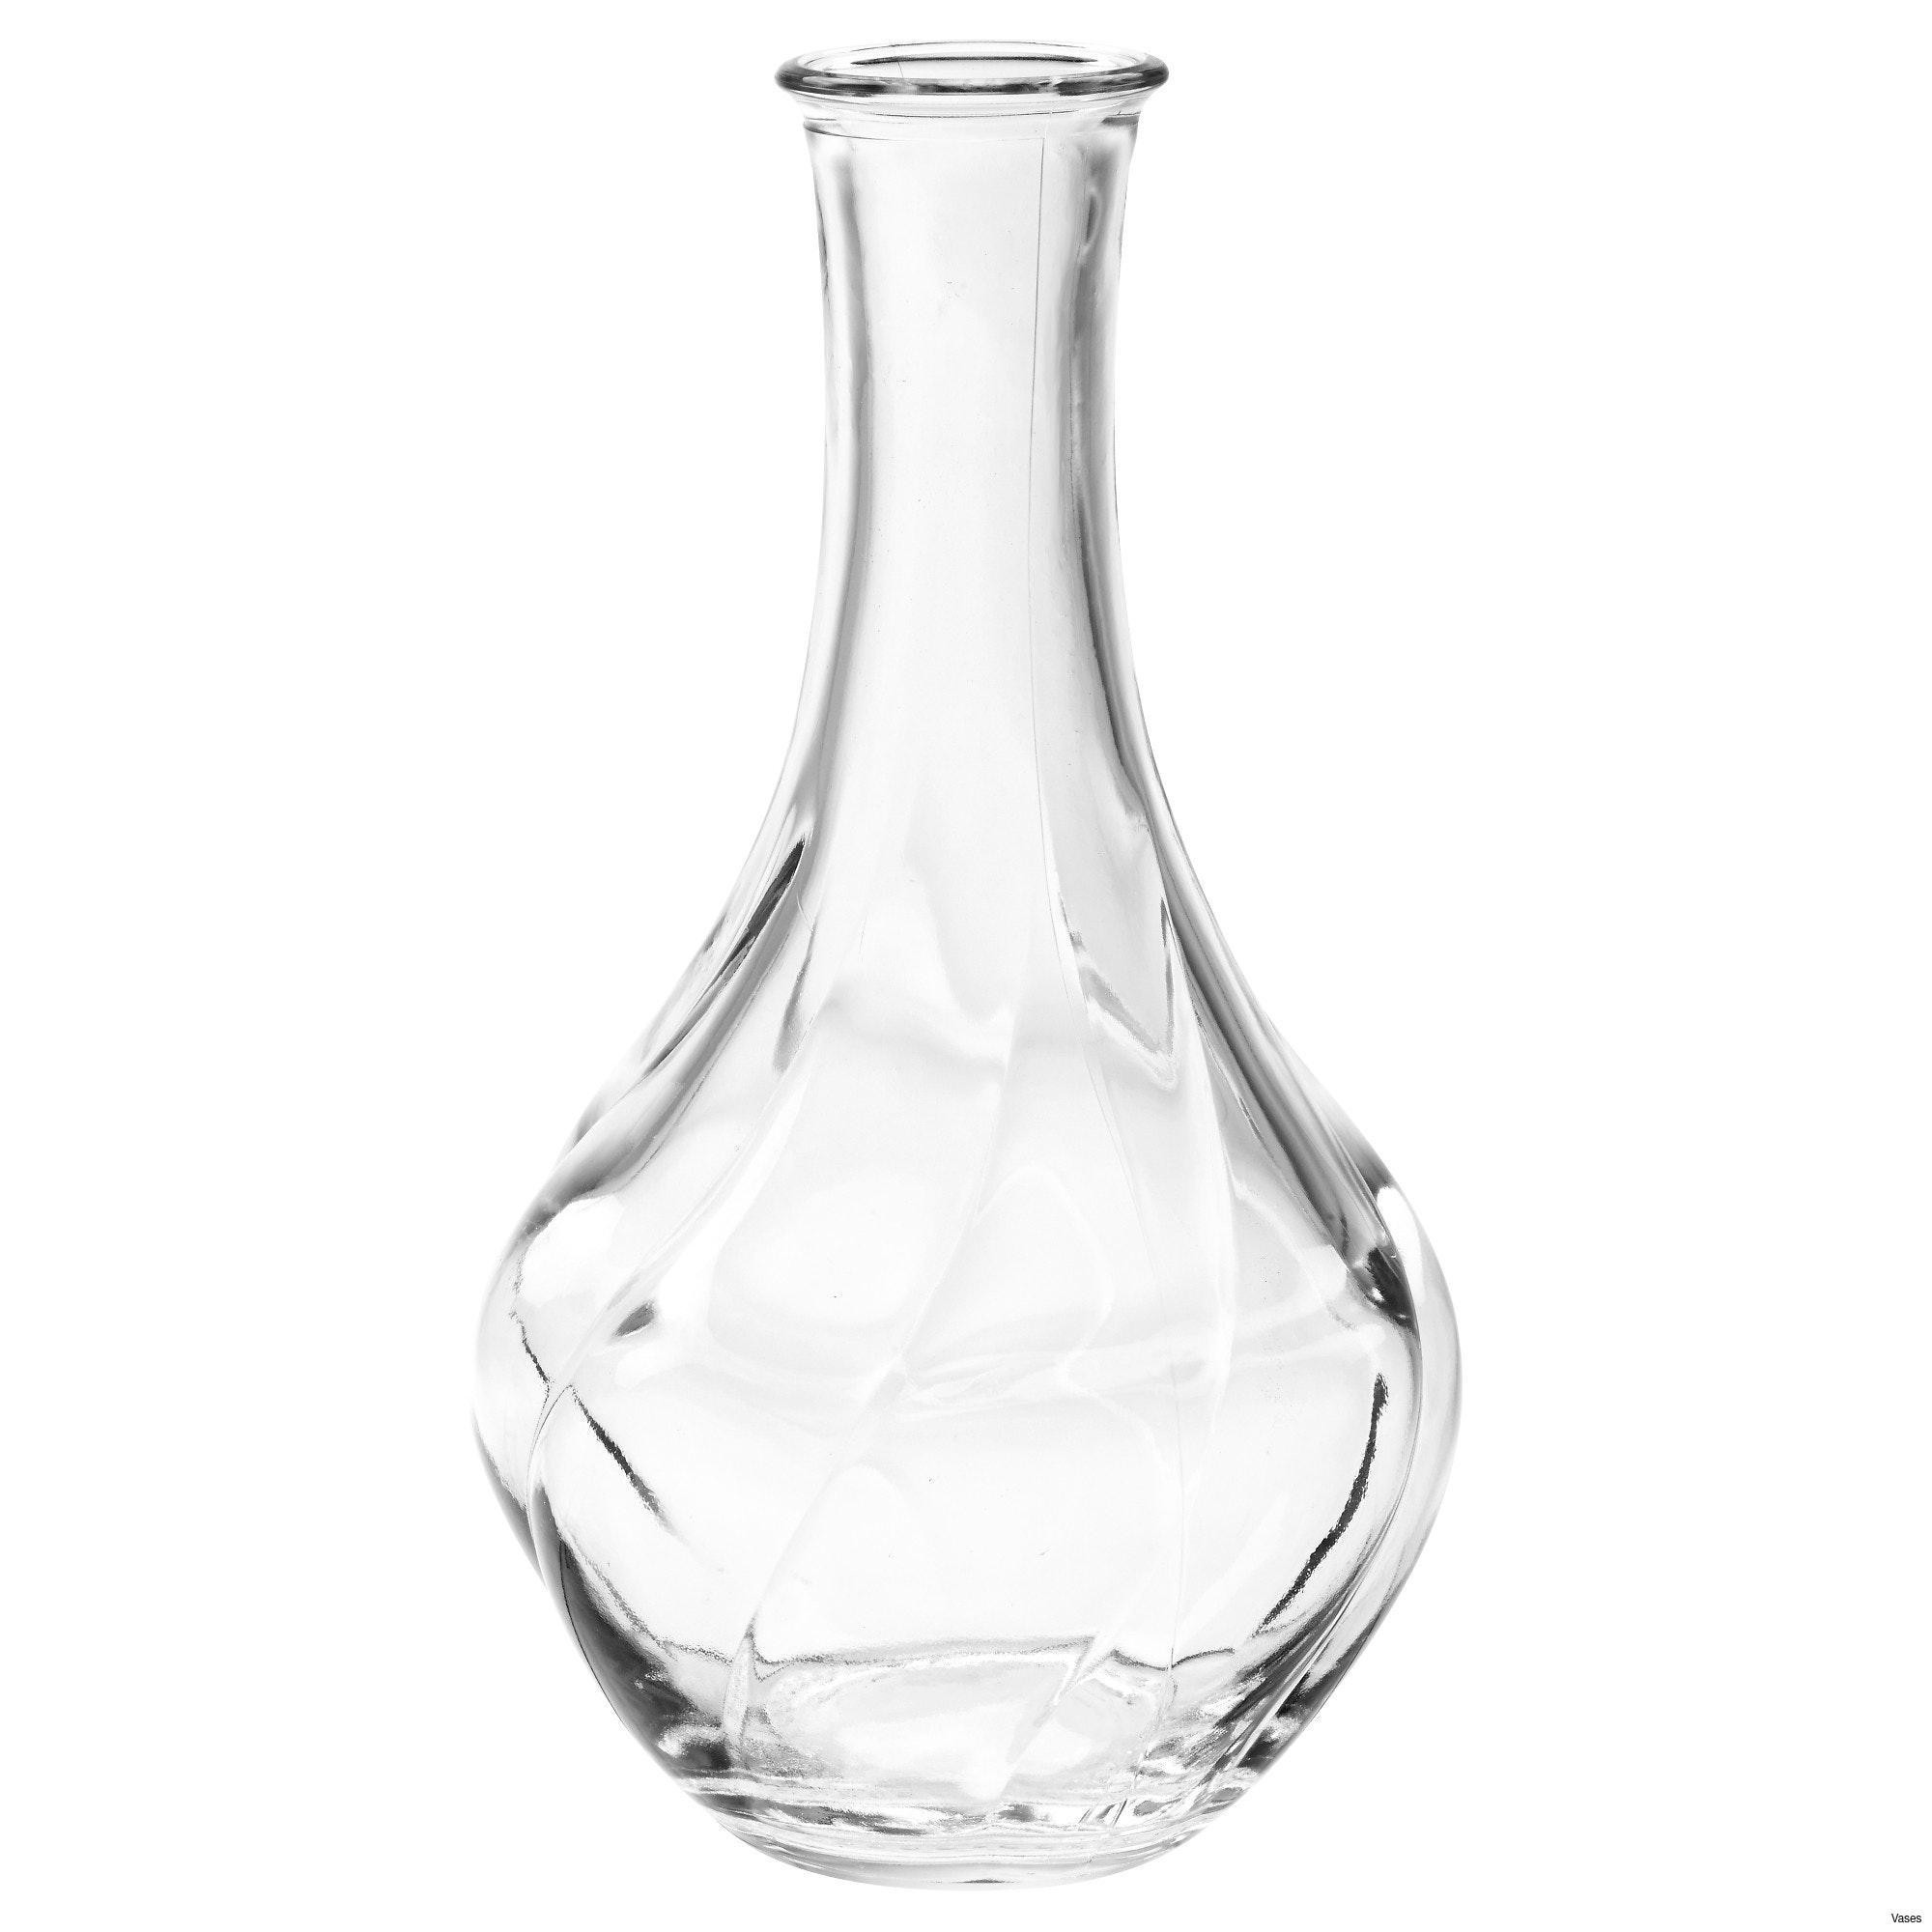 20 inch glass vase of huge glass vase photos living room glass vases fresh clear vase 0d inside huge glass vase photos living room glass vases fresh clear vase 0d tags amazing and of